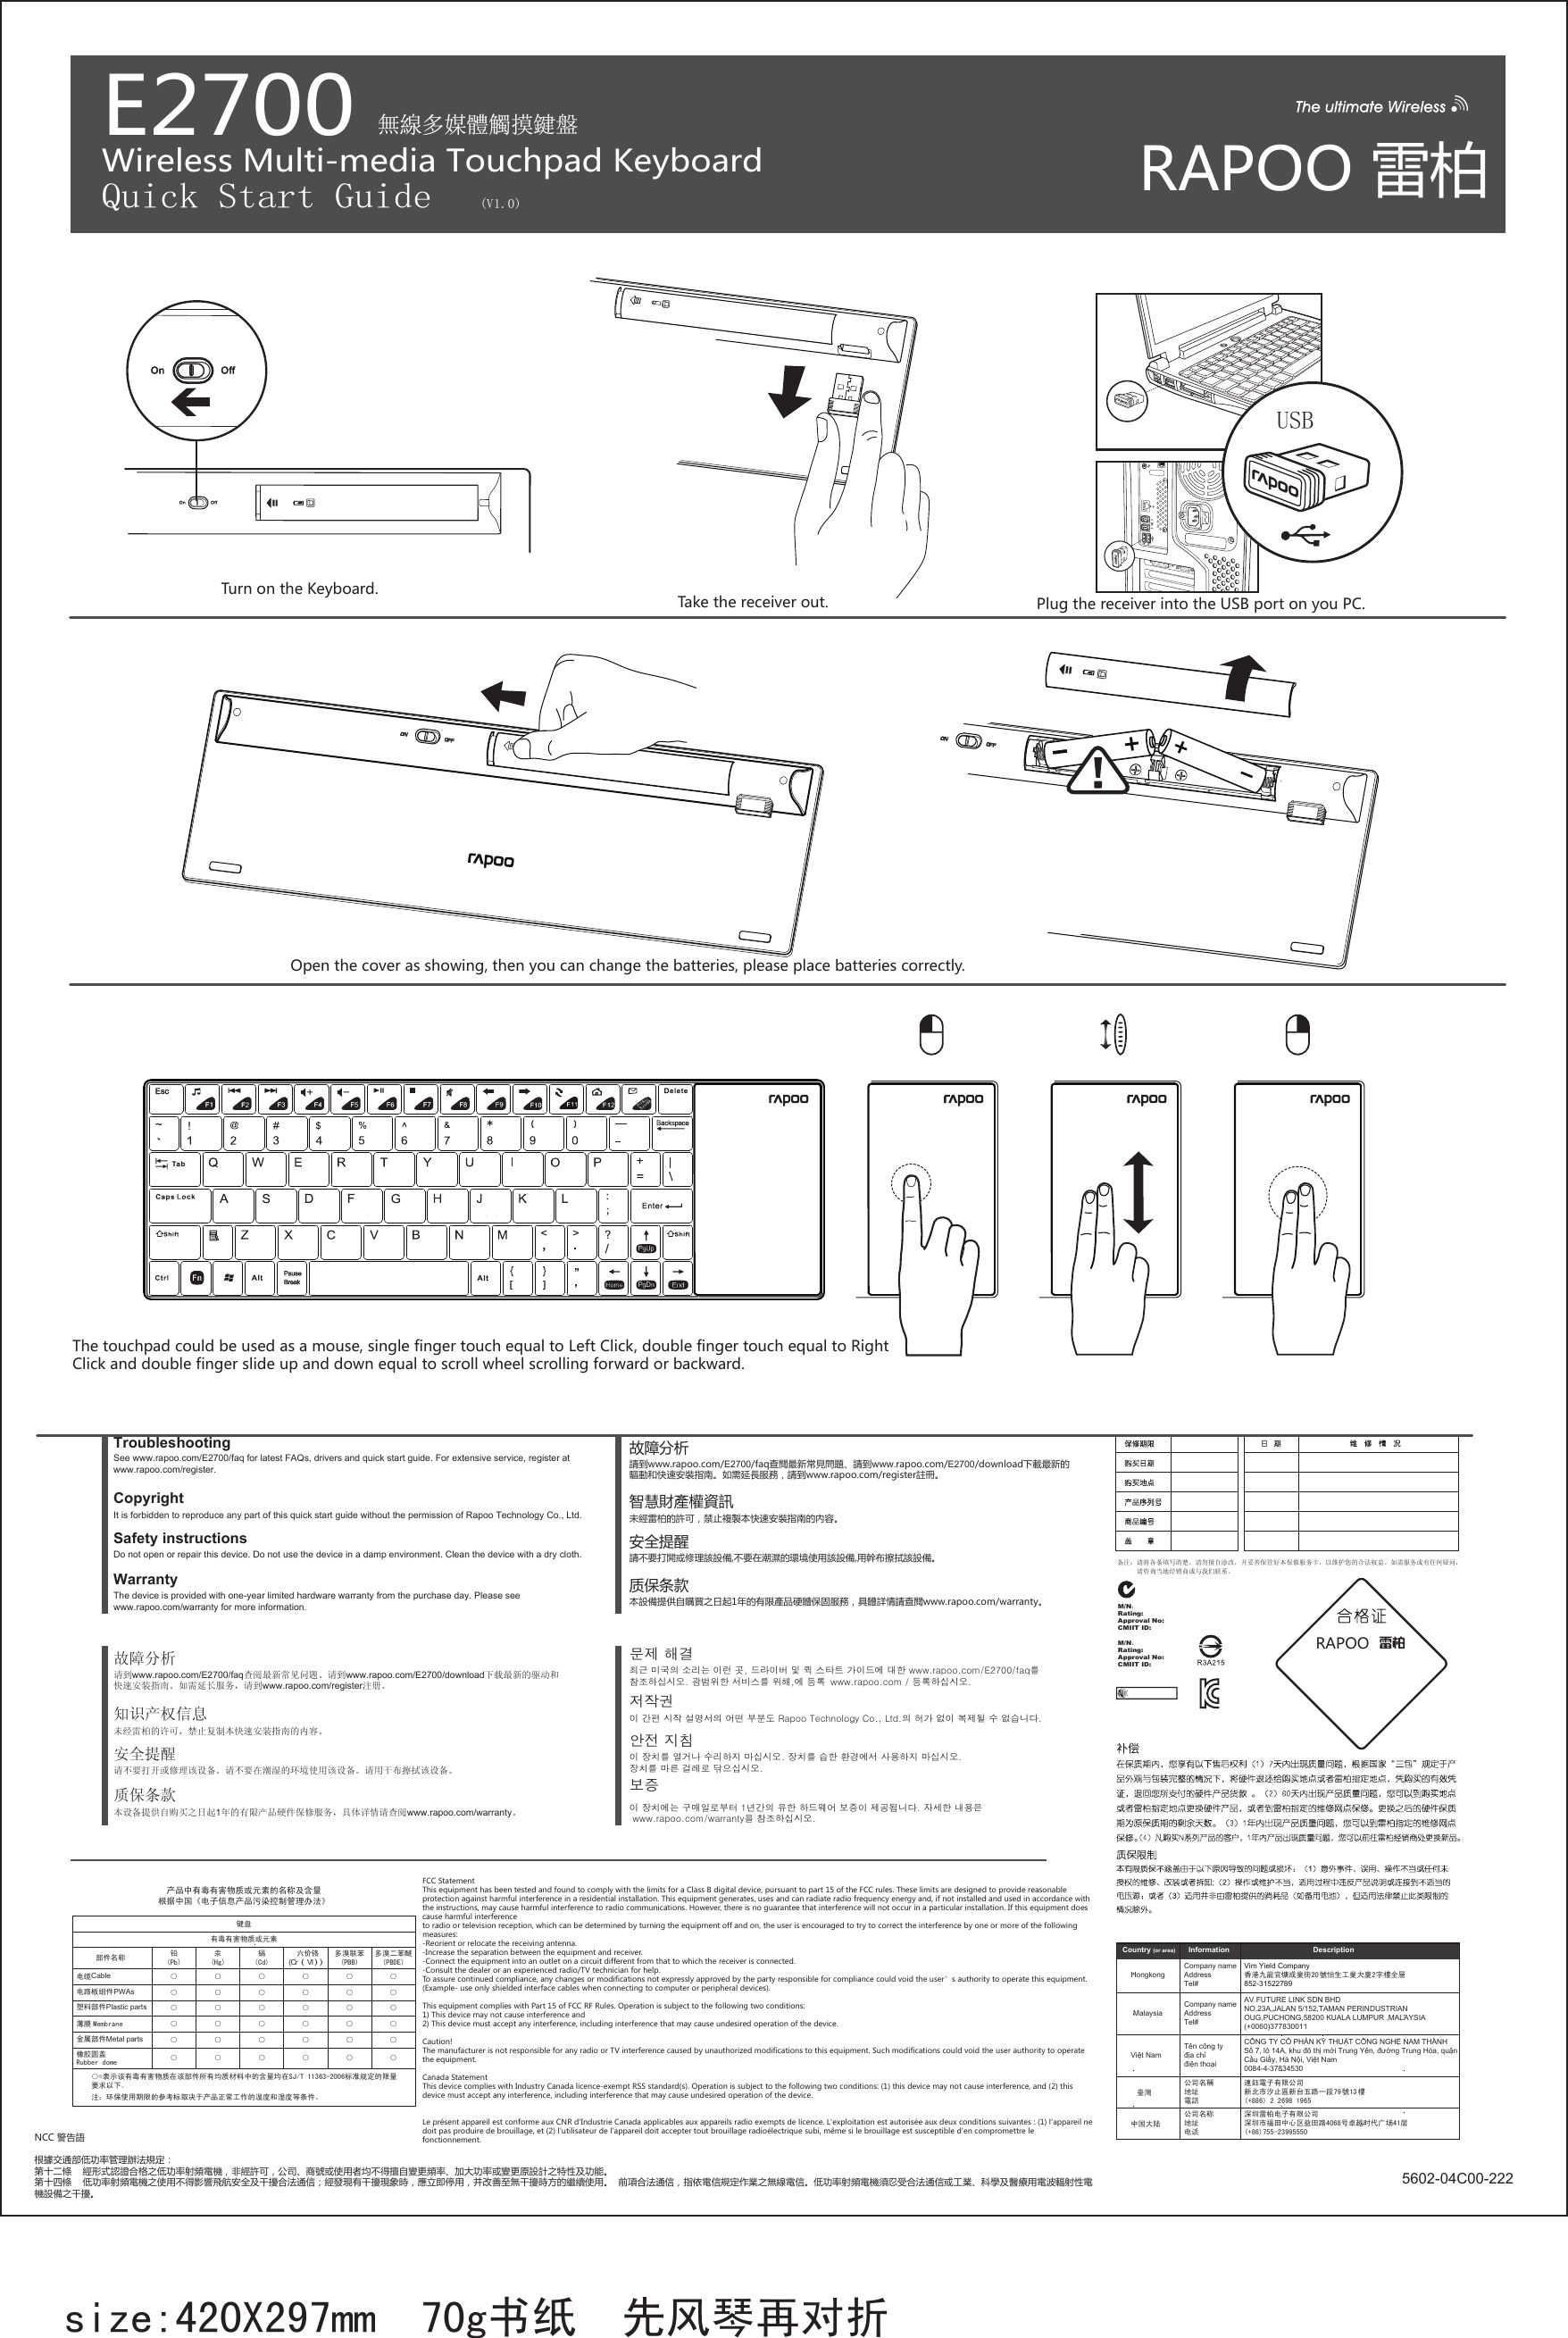 USBE2700Wireless Multi-media Touchpad KeyboardQuick Start Guide (V1.0)size:420X297mm  70g书纸  先风琴再对折备注：请将各条填写清楚，请勿擅自涂改，并妥善保管好本保修服务卡，以维护您的合法权益。如需服务或有任何疑问，      请咨询当地经销商或与我们联系。M/N：                        Rating:                       Approval No:                  CMIIT ID:         M/N：                        Rating:                       Approval No:                  CMIIT ID:         WarrantyThe device is provided with one-year limited hardware warranty from the purchase day. Please see www.rapoo.com/warranty for more information.  See www.rapoo.com/E2700/faq for latest FAQs, drivers and quick start guide. For extensive service, register at www.rapoo.com/register.TroubleshootingDo not open or repair this device. Do not use the device in a damp environment. Clean the device with a dry cloth.Safety instructionsCopyright It is forbidden to reproduce any part of this quick start guide without the permission of Rapoo Technology Co., Ltd. 质保条款本設備提供自購買之日起1年的有限產品硬體保固服務，具體詳情請查閱www.rapoo.com/warranty。請到www.rapoo.com/E2700/faq查閱最新常見問題、請到www.rapoo.com/E2700/download下載最新的驅動和快速安裝指南。如需延長服務，請到www.rapoo.com/register註冊。故障分析請不要打開或修理該設備,不要在潮濕的環境使用該設備,用幹布擦拭該設備。安全提醒智慧財產權資訊未經雷柏的許可，禁止複製本快速安裝指南的內容。质保条款本设备提供自购买之日起1年的有限产品硬件保修服务，具体详情请查阅www.rapoo.com/warranty。请到www.rapoo.com/E2700/faq查阅最新常见问题、请到www.rapoo.com/E2700/download下载最新的驱动和快速安装指南。如需延长服务，请到www.rapoo.com/register注册。故障分析请不要打开或修理该设备。请不要在潮湿的环境使用该设备。请用干布擦拭该设备。安全提醒知识产权信息未经雷柏的许可，禁止复制本快速安装指南的内容。보증안전 지침이 장치를 열거나 수리하지 마십시오. 장치를 습한 환경에서 사용하지 마십시오.장치를 마른 걸레로 닦으십시오.이 장치에는 구매일로부터 1년간의 유한 하드웨어 보증이 제공됩니다. 자세한 내용은 www.rapoo.com/warranty을 참조하십시오.저작권 이 간편 시작 설명서의 어떤 부분도 Rapoo Technology Co., Ltd.의 허가 없이 복제될 수 없습니다.최근 미국의 소리는 이런 곳, 드라이버 및 퀵 스타트 가이드에 대한 www.rapoo.com/E2700/faq를 참조하십시오. 광범위한 서비스를 위해,에 등록  www.rapoo.com / 등록하십시오.문제 해결5602-04C00-222产品中有毒有害物质或元素的名称及含量根据中国《电子信息产品污染控制管理办法》电路板组件PWAs塑料部件Plastic parts薄膜 Membrane金属部件Metal parts橡胶圆盖Rubber dome○=表示该有毒有害物质在该部件所有均质材料中的含量均在SJ/T 11363-2006标准规定的限量要求以下。注：环保使用期限的参考标取决于产品正常工作的温度和湿度等条件。铅(Pb)汞(Hg)镉(Cd)六价铬(Cr（VI ））多溴联苯(PBB)多溴二苯醚(PBDE)电缆Cable键盘○○○ ○○○○○○○○○○○○○○○○○○○○ ○○○○○○○○○○○○○部件名称有毒有害物质或元素Company nameAddressTel#AV FUTURE LINK SDN BHDNO.23A,JALAN 5/152,TAMAN PERINDUSTRIAN OUG,PUCHONG,58200 KUALA LUMPUR ,MALAYSIA(+0060)377830011Hongkong臺灣中国大陆Việt NamMalaysiaVim Yield Company 香港九龍官塘成業街20 號怡生工業大廈2字樓全層852-31522789  DescriptionInformationCountry (or area)Company nameAddressTel#Tên công tyđịa chỉđiện thoại公司名称  地址电话CÔNG TY CỔ PHẦN KỸ THUẬT CÔNG NGHỆ NAM THÀNHSố 7, lô 14A, khu đô thị mới Trung Yên, đường Trung Hòa, quậnCầu Giấy, Hà Nội, Việt Nam0084-4-37834530  　 連鈺電子有限公司新北市汐止區新台五路一段79 號13 樓(+886) 2 2698 1965深圳雷柏电子有限公司深圳市福田中心区益田路4068号卓越时代广场41层(+86)755-23995550公司名稱地址電話無線多媒體觸摸鍵盤RAPOO 雷柏Turn on the Keyboard. Take the receiver out. Plug the receiver into the USB port on you PC.Open the cover as showing, then you can change the batteries, please place batteries correctly.The touchpad could be used as a mouse, single finger touch equal to Left Click, double finger touch equal to Right Click and double finger slide up and down equal to scroll wheel scrolling forward or backward.RAPOOFCC StatementThis equipment has been tested and found to comply with the limits for a Class B digital device, pursuant to part 15 of the FCC rules. These limits are designed to provide reasonable protection against harmful interference in a residential installation. This equipment generates, uses and can radiate radio frequency energy and, if not installed and used in accordance with the instructions, may cause harmful interference to radio communications. However, there is no guarantee that interference will not occur in a particular installation. If this equipment does cause harmful interference to radio or television reception, which can be determined by turning the equipment off and on, the user is encouraged to try to correct the interference by one or more of the following measures:-Reorient or relocate the receiving antenna.-Increase the separation between the equipment and receiver.-Connect the equipment into an outlet on a circuit different from that to which the receiver is connected.-Consult the dealer or an experienced radio/TV technician for help.To assure continued compliance, any changes or modifications not expressly approved by the party responsible for compliance could void the user’s authority to operate this equipment. (Example- use only shielded interface cables when connecting to computer or peripheral devices).This equipment complies with Part 15 of FCC RF Rules. Operation is subject to the following two conditions:1) This device may not cause interference and2) This device must accept any interference, including interference that may cause undesired operation of the device.Caution! The manufacturer is not responsible for any radio or TV interference caused by unauthorized modifications to this equipment. Such modifications could void the user authority to operate the equipment. Canada Statement  This device complies with Industry Canada licence-exempt RSS standard(s). Operation is subject to the following two conditions: (1) this device may not cause interference, and (2) this device must accept any interference, including interference that may cause undesired operation of the device. Le présent appareil est conforme aux CNR d&apos;Industrie Canada applicables aux appareils radio exempts de licence. L&apos;exploitation est autorisée aux deux conditions suivantes : (1) l&apos;appareil ne doit pas produire de brouillage, et (2) l&apos;utilisateur de l&apos;appareil doit accepter tout brouillage radioélectrique subi, même si le brouillage est susceptible d&apos;en compromettre le fonctionnement.NCC 警告語根據交通部低功率管理辦法規定：第十二條    經形式認證合格之低功率射頻電機，非經許可，公司、商號或使用者均不得擅自變更頻率、加大功率或變更原設計之特性及功能。  第十四條    低功率射頻電機之使用不得影響飛航安全及干擾合法通信；經發現有干擾現象時，應立即停用，并改善至無干擾時方的繼續使用。  前項合法通信，指依電信規定作業之無線電信。低功率射頻電機須忍受合法通信或工業、科學及醫療用電波輻射性電機設備之干擾。